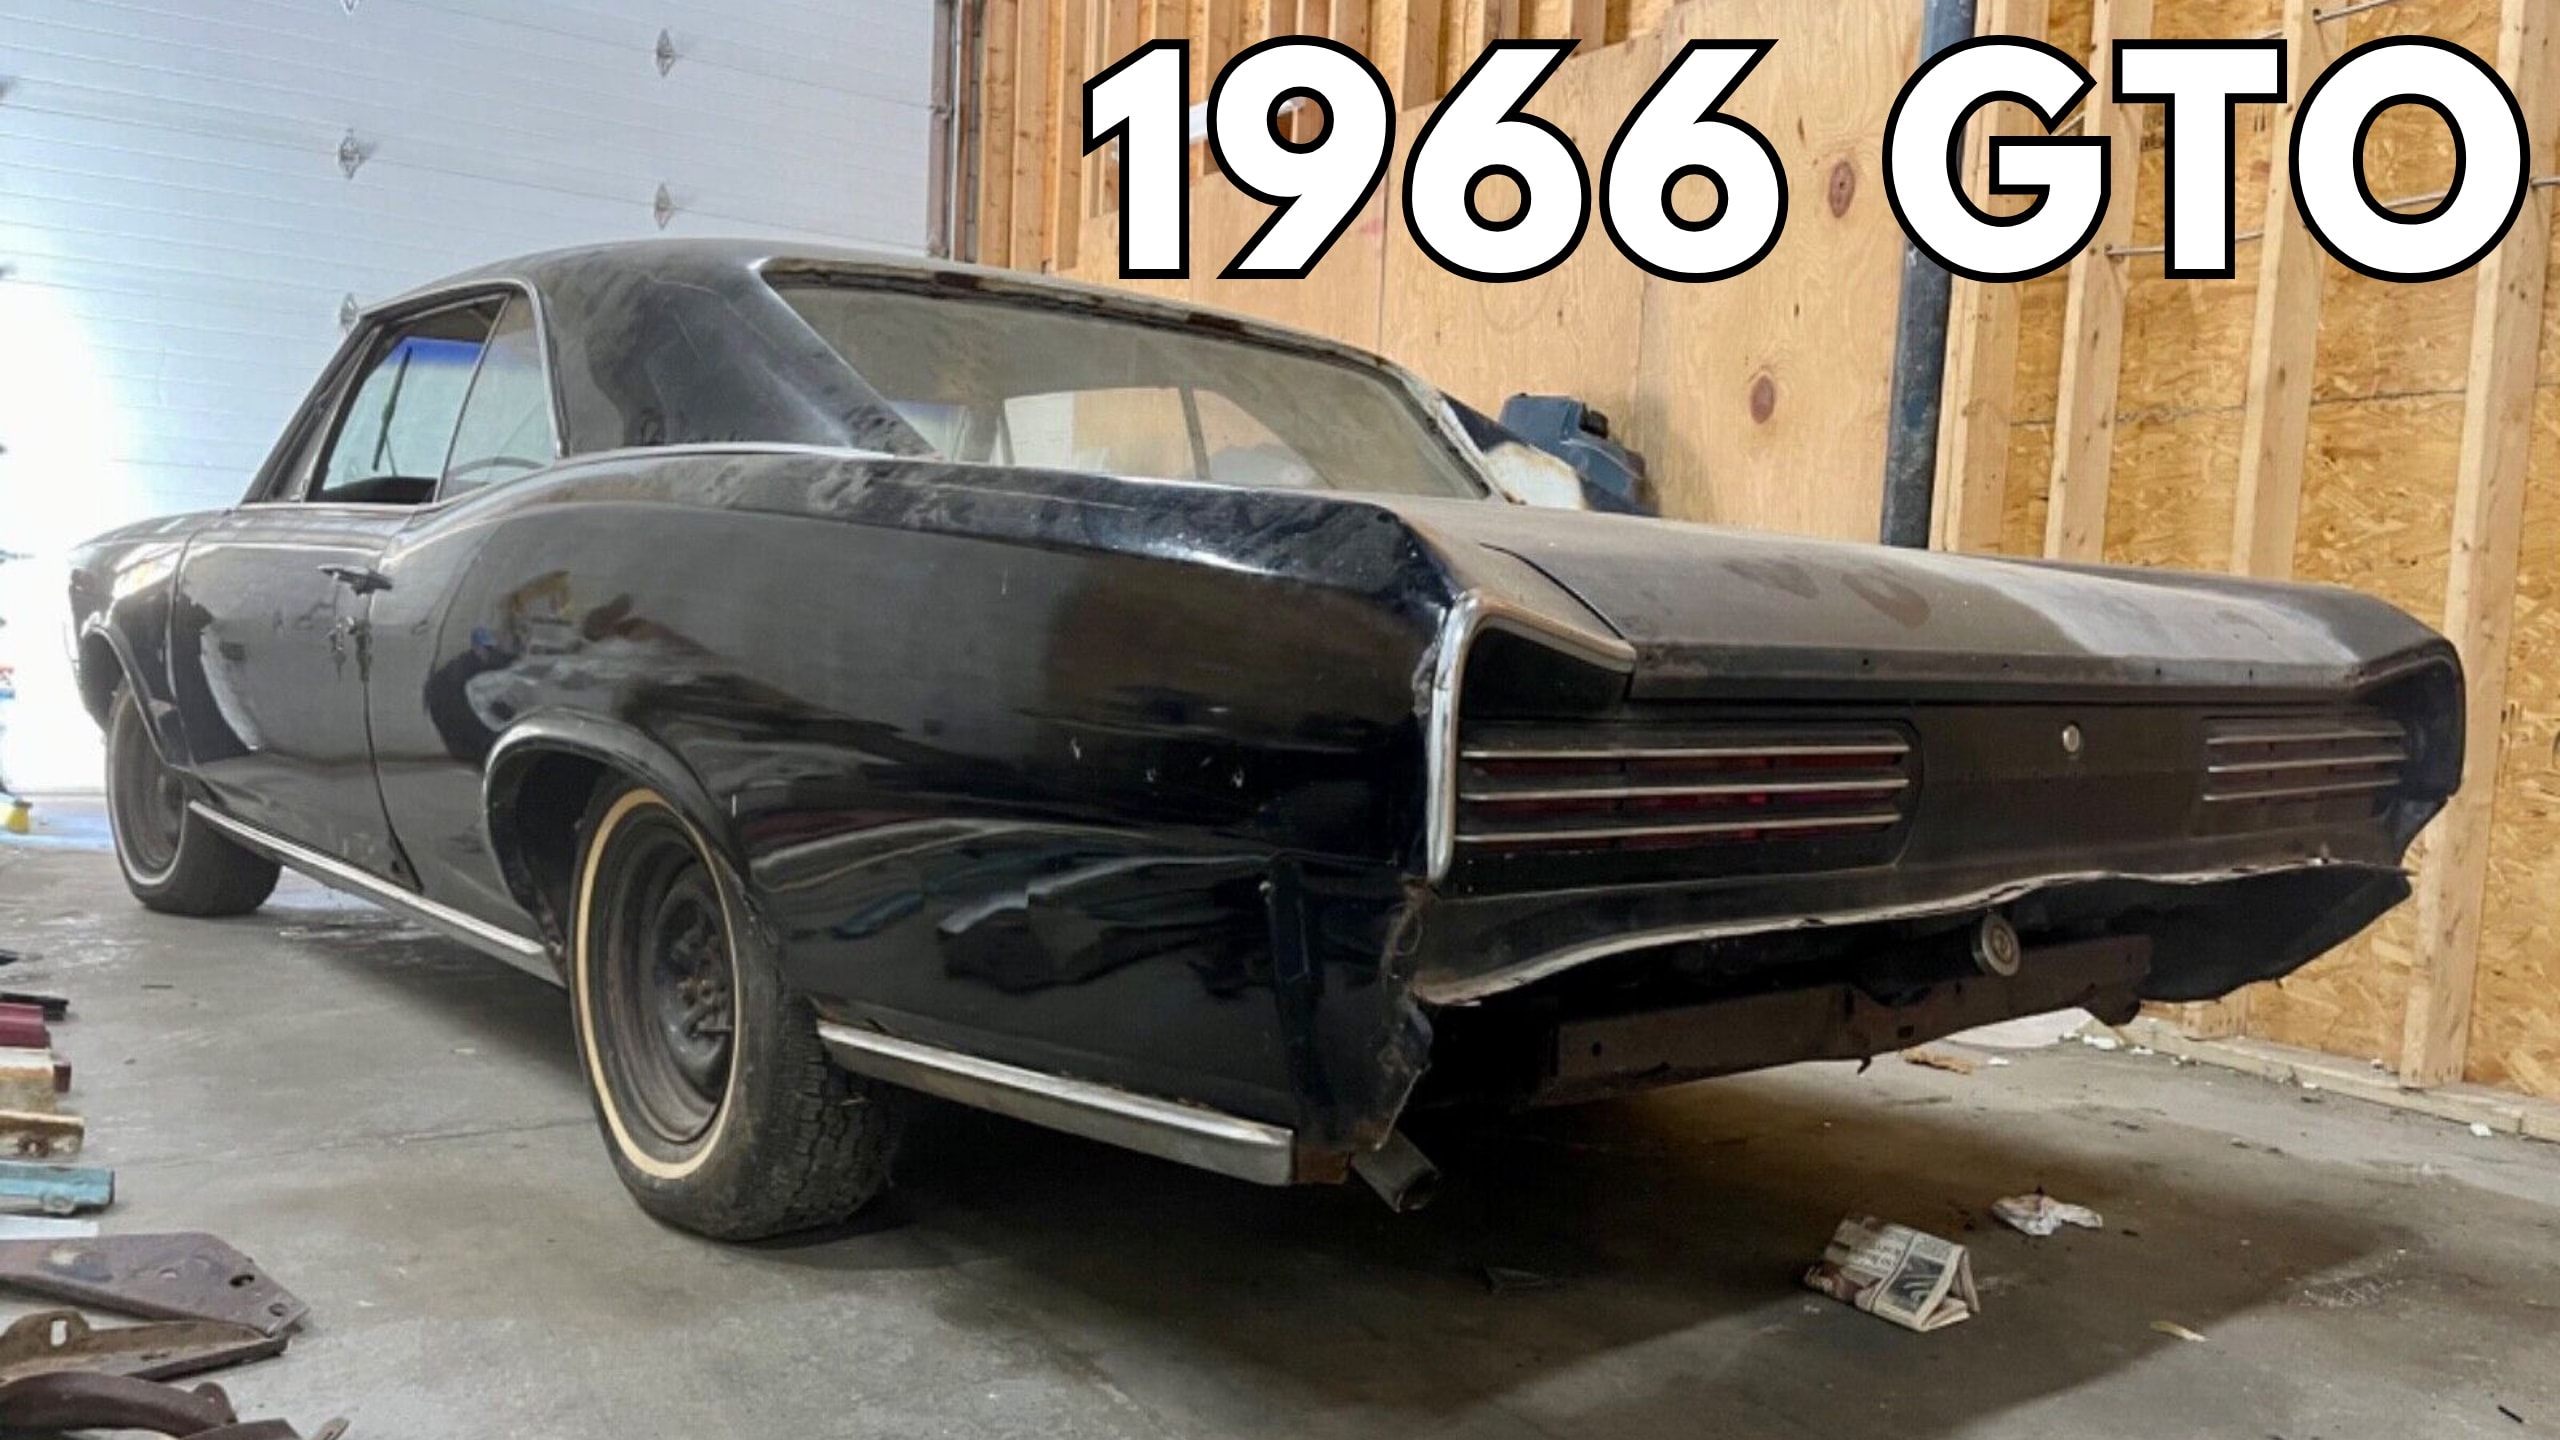 1966 Pontiac GTO Emerges From a Garage With a Gigantic NOS Parts Collection